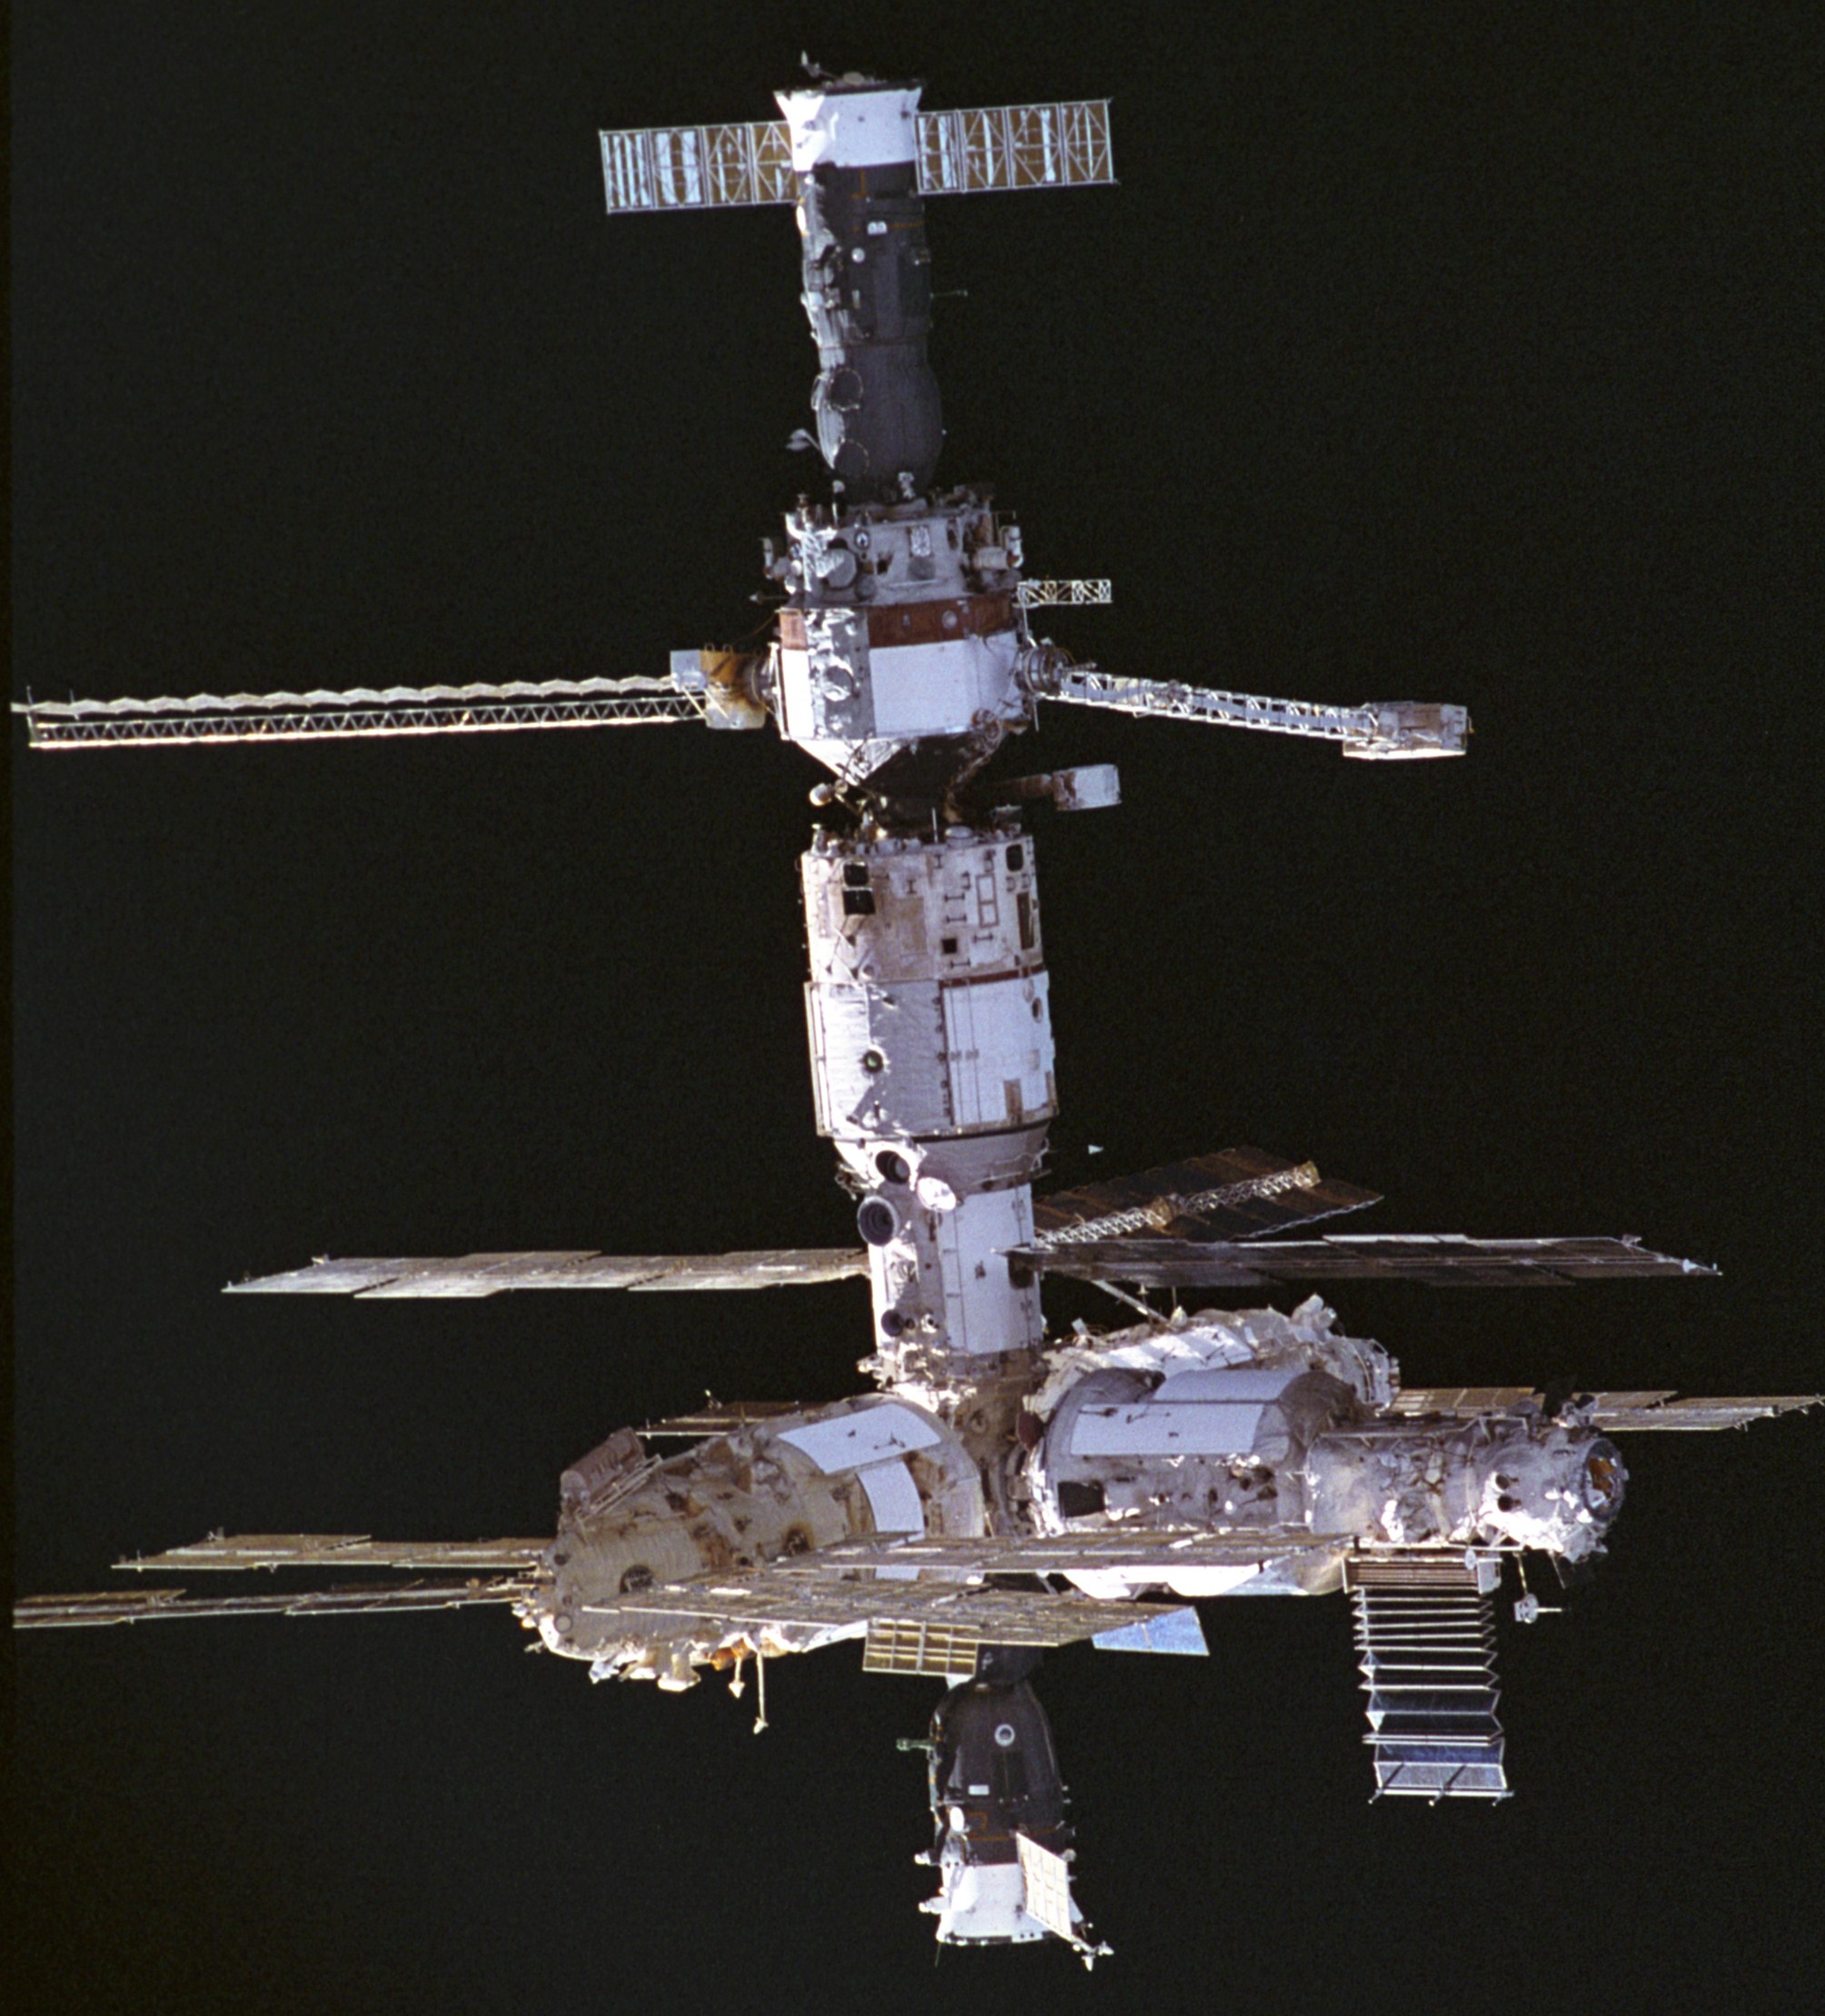 Mir from STS-74